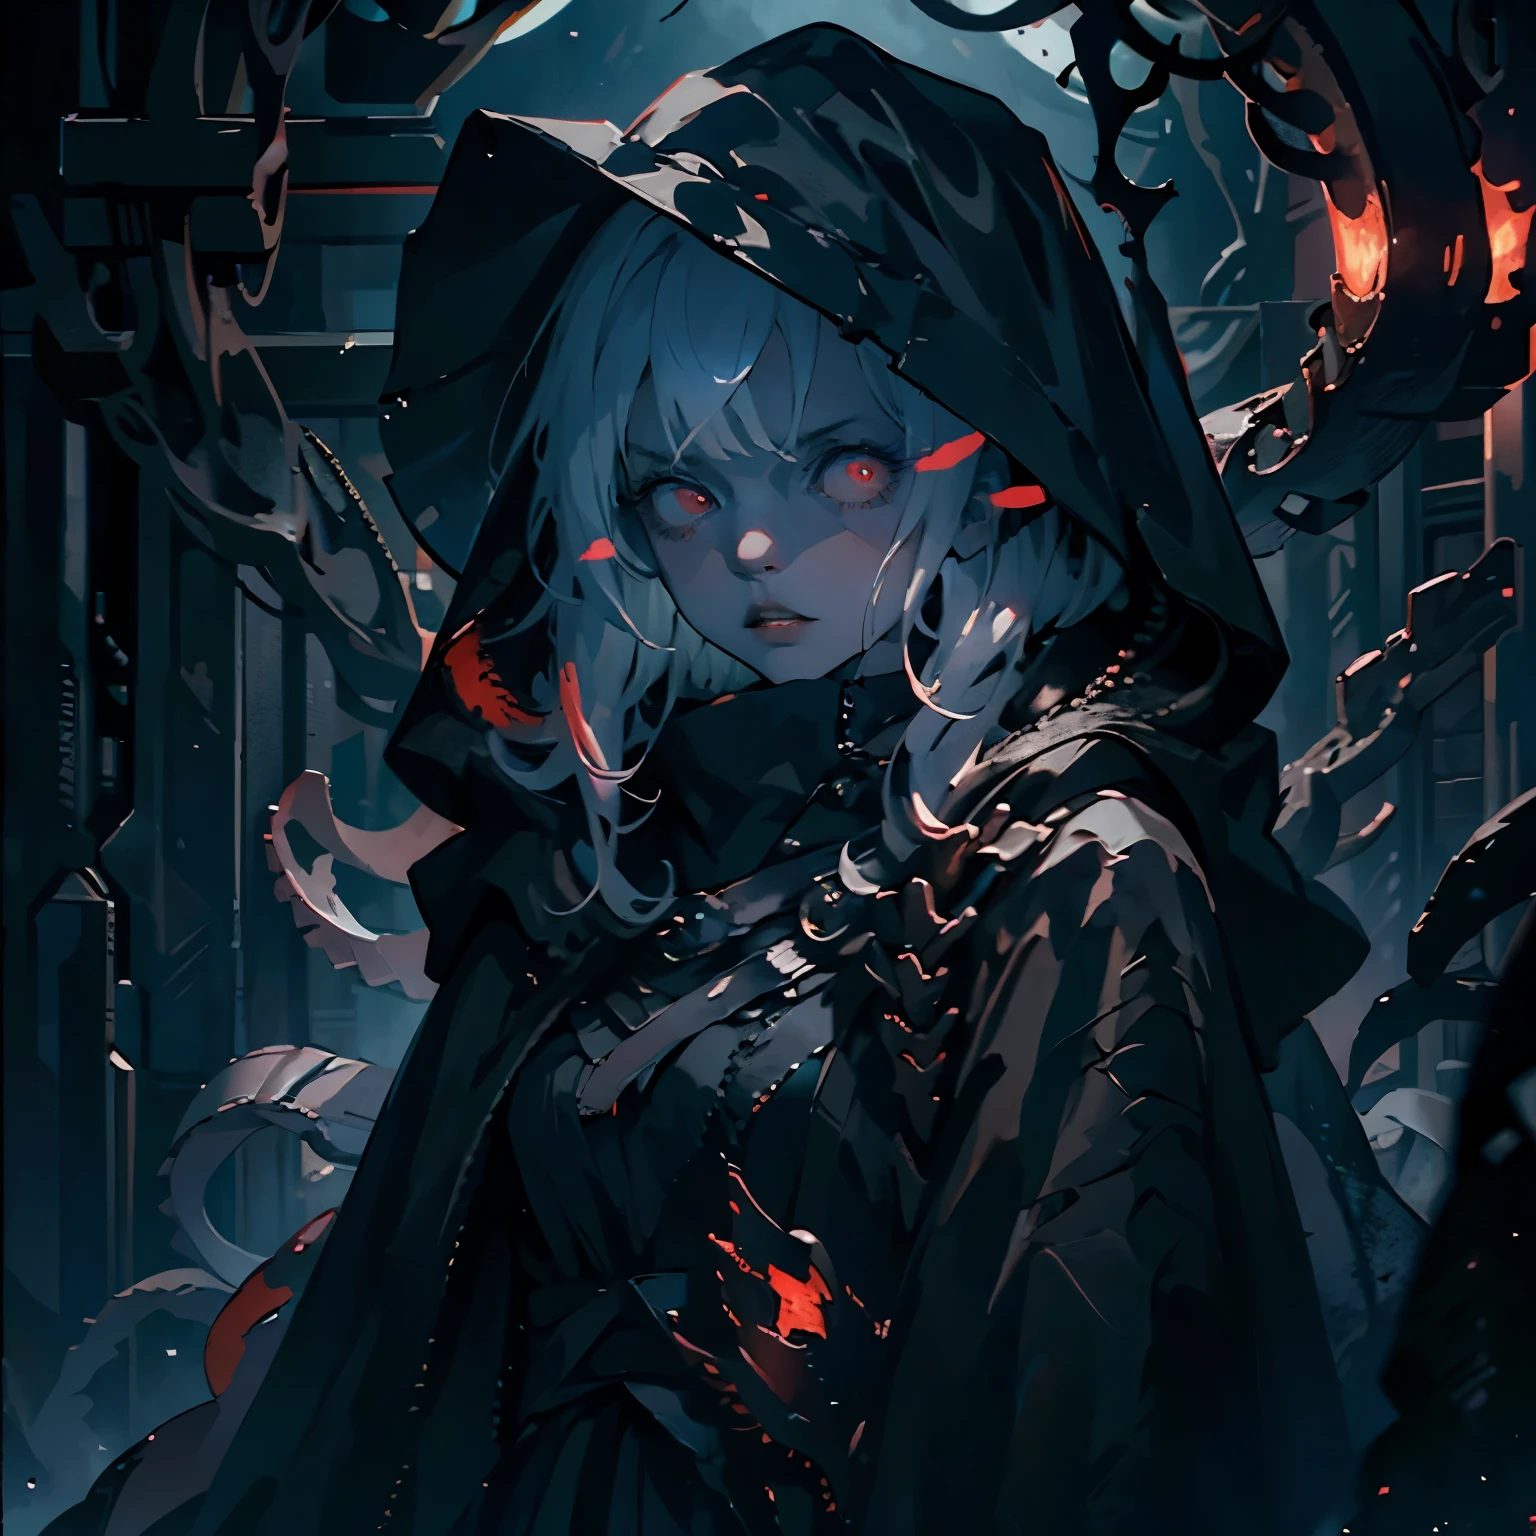 Young Female, Pale Skin, Red Eyes, Short White Hair, Menacing Expression, Beautiful, Dark Lighting, Intimidating, Horror Theme, Standing, Darkness surrounding, Tentacles forming from behind her back, Wearing a black cloak with the hood up, tentacles moving from underneath the cloak, Cinematic, HDR, Vibrant Colors, RTX, HD, Very Detailed, Masterpiece